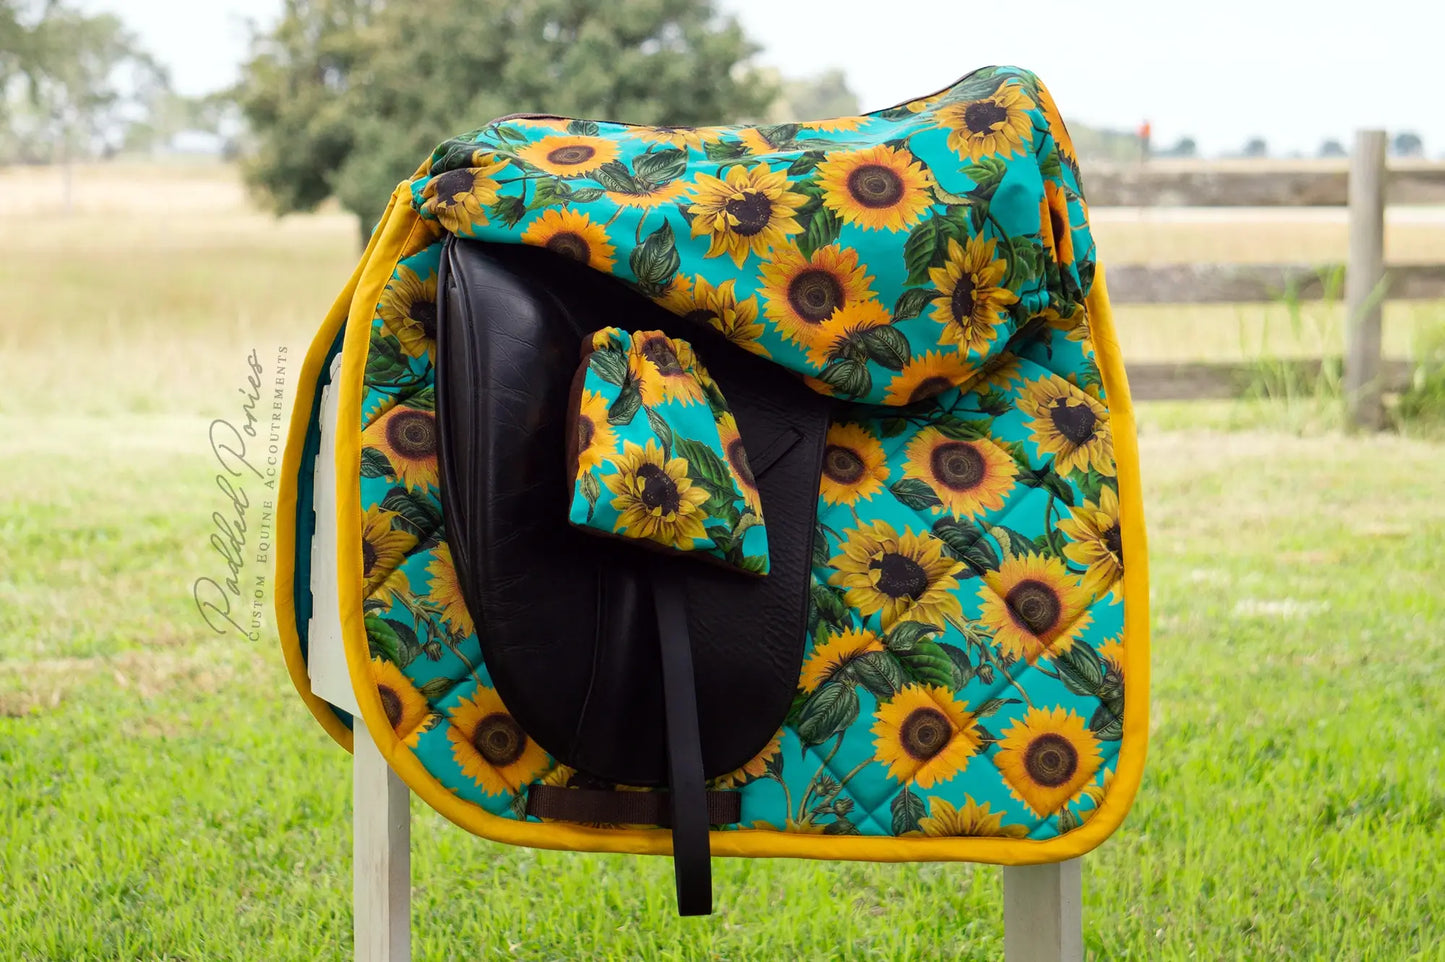 Turquoise Teal Aqua Yellow Sunflowers Floral Dressage Saddle Cover Matching Set